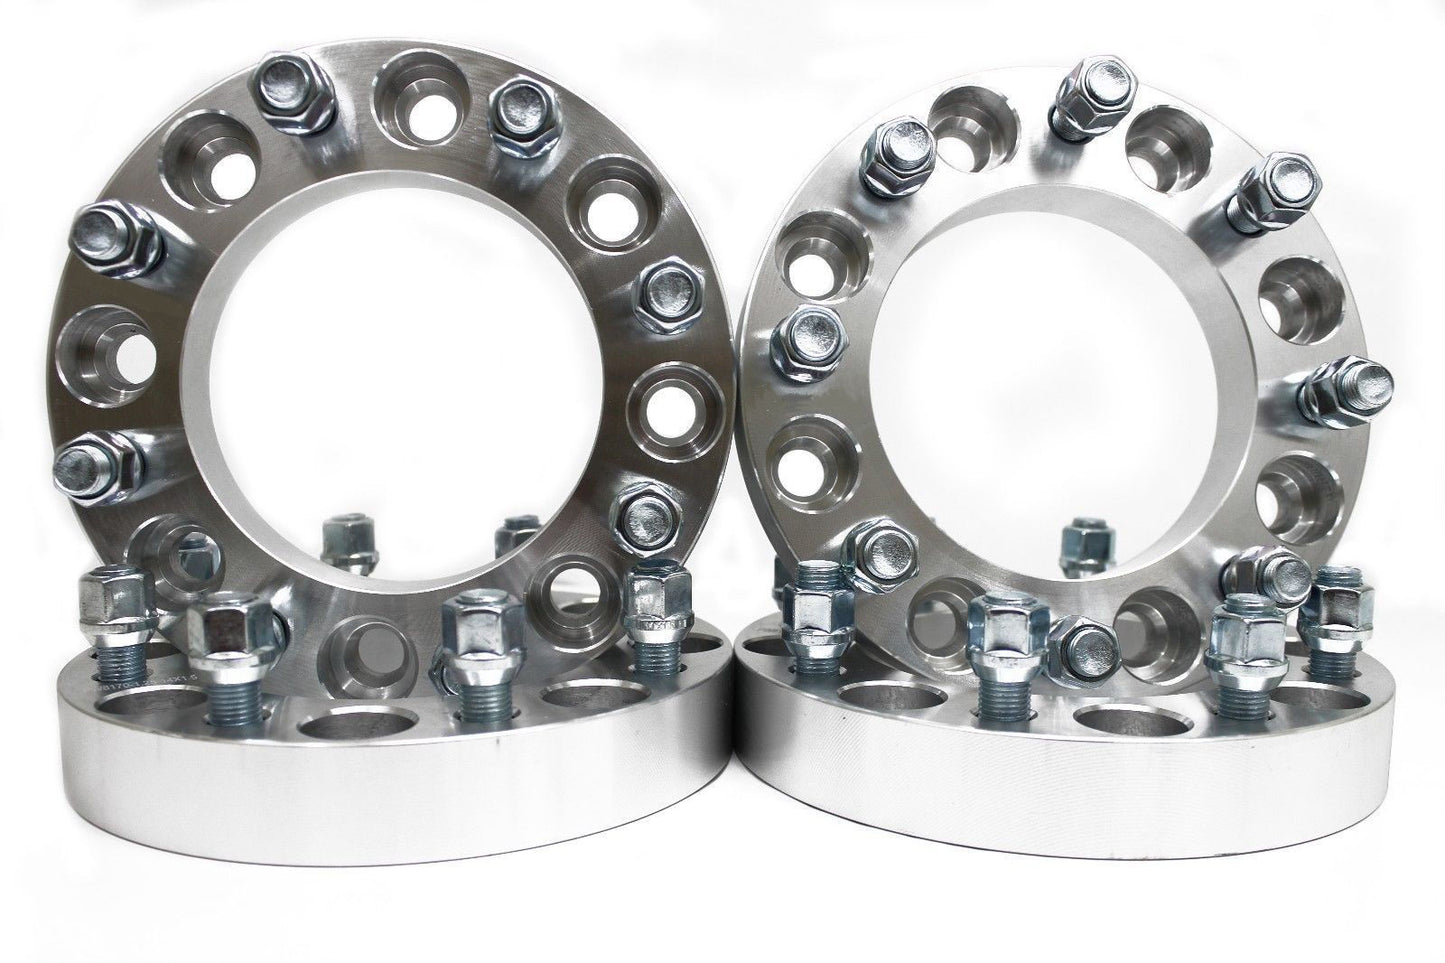 4PCS | 2" INCH 8X6.5 TO 8x6.5 WHEEL SPACERS 9/16 | DODGE RAM | FORD F-250 F-350